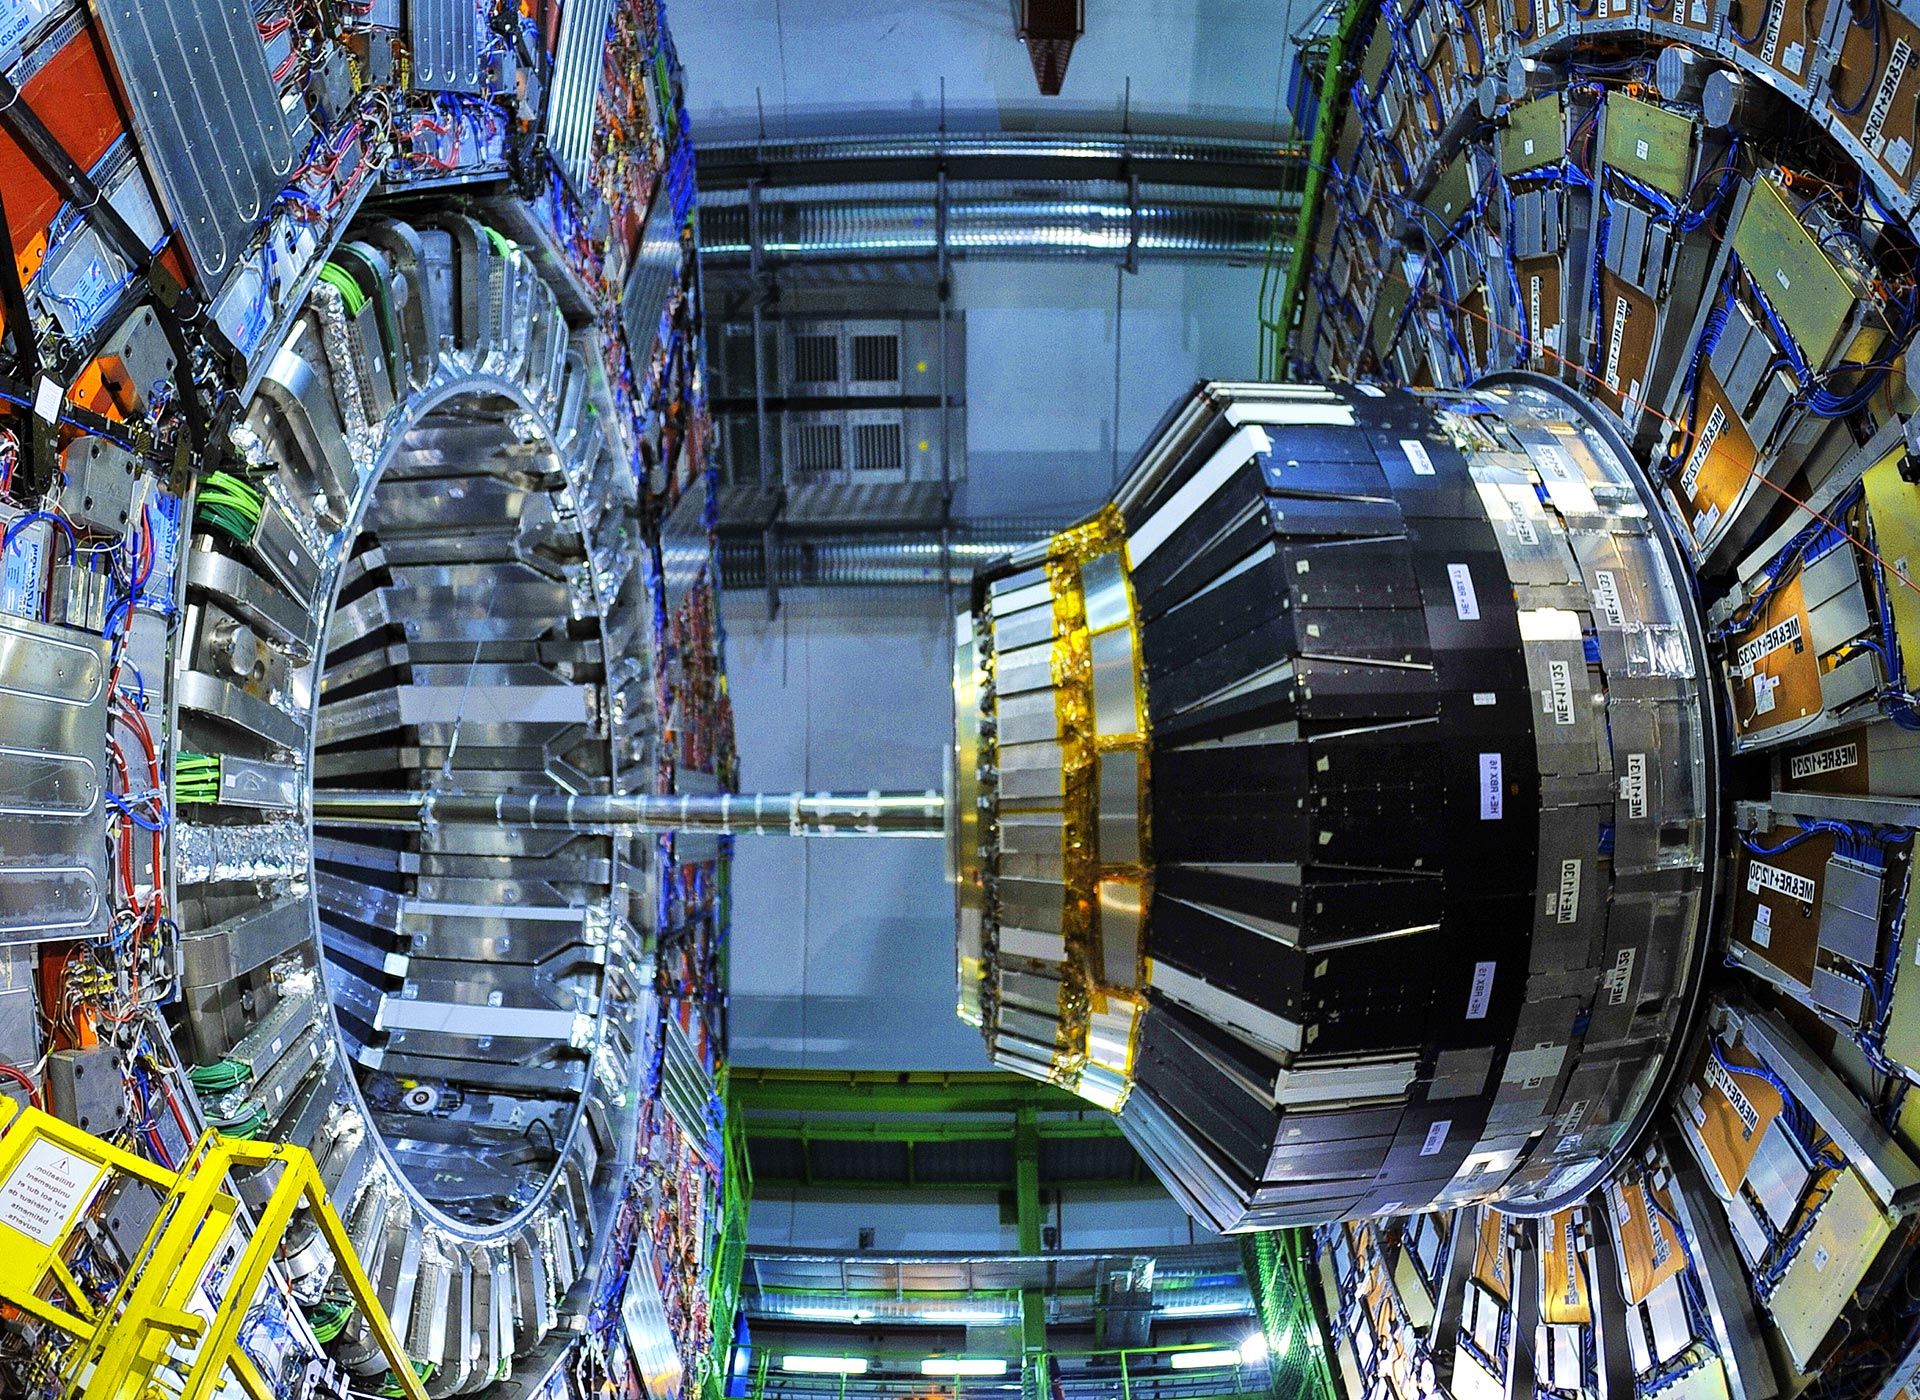 CERN (European Organization for Nuclear Research) announced the use of the 